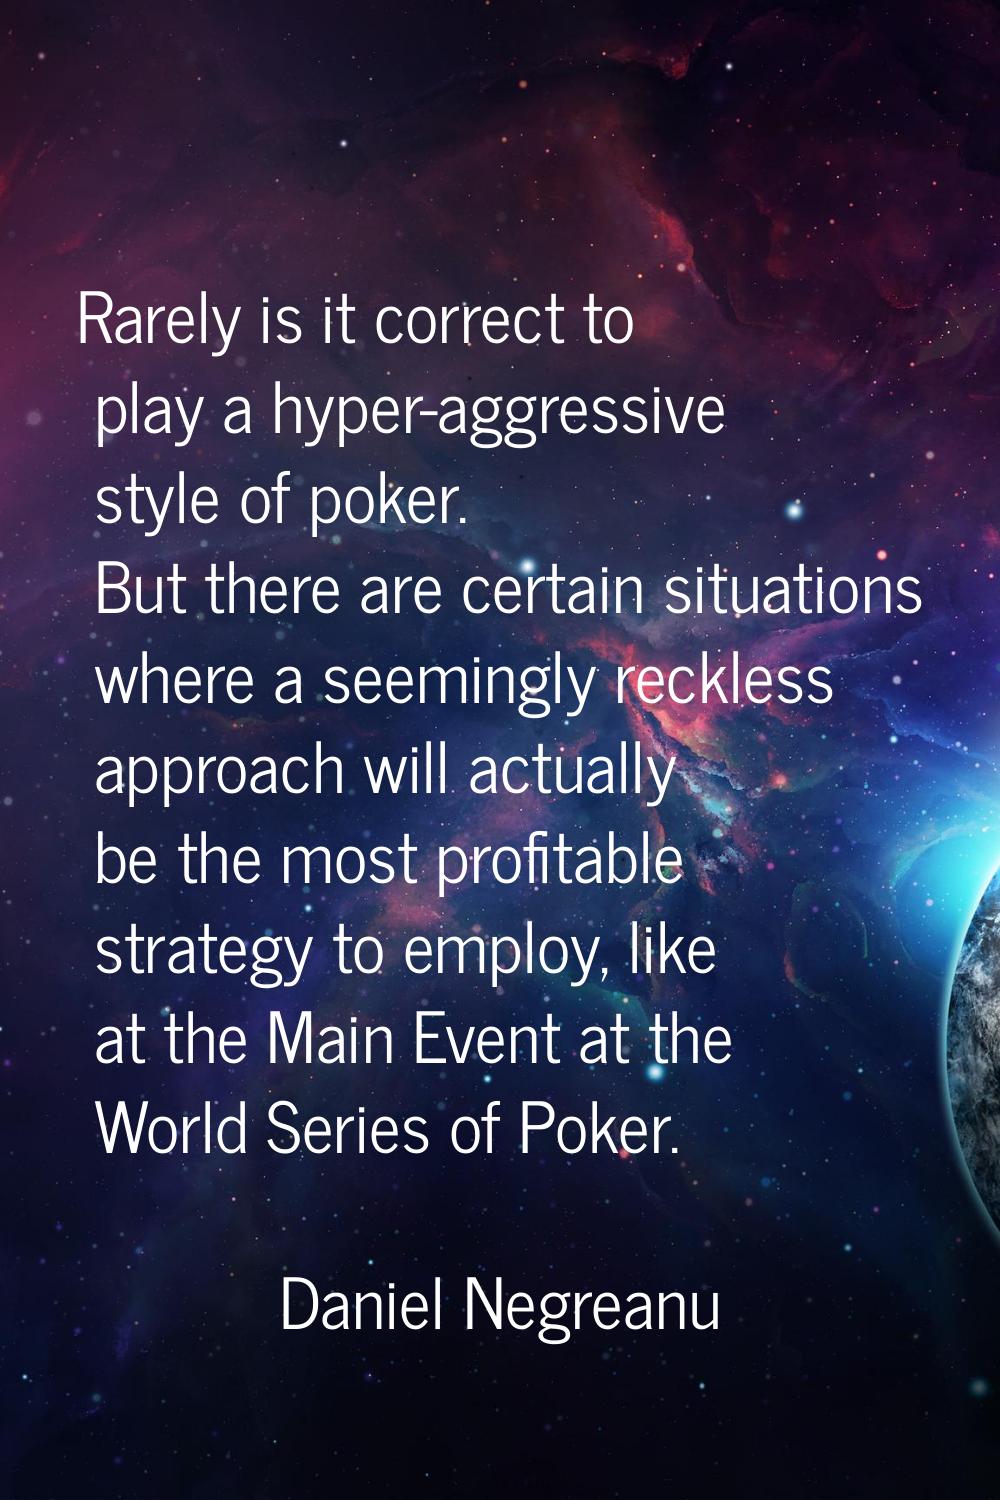 Rarely is it correct to play a hyper-aggressive style of poker. But there are certain situations wh